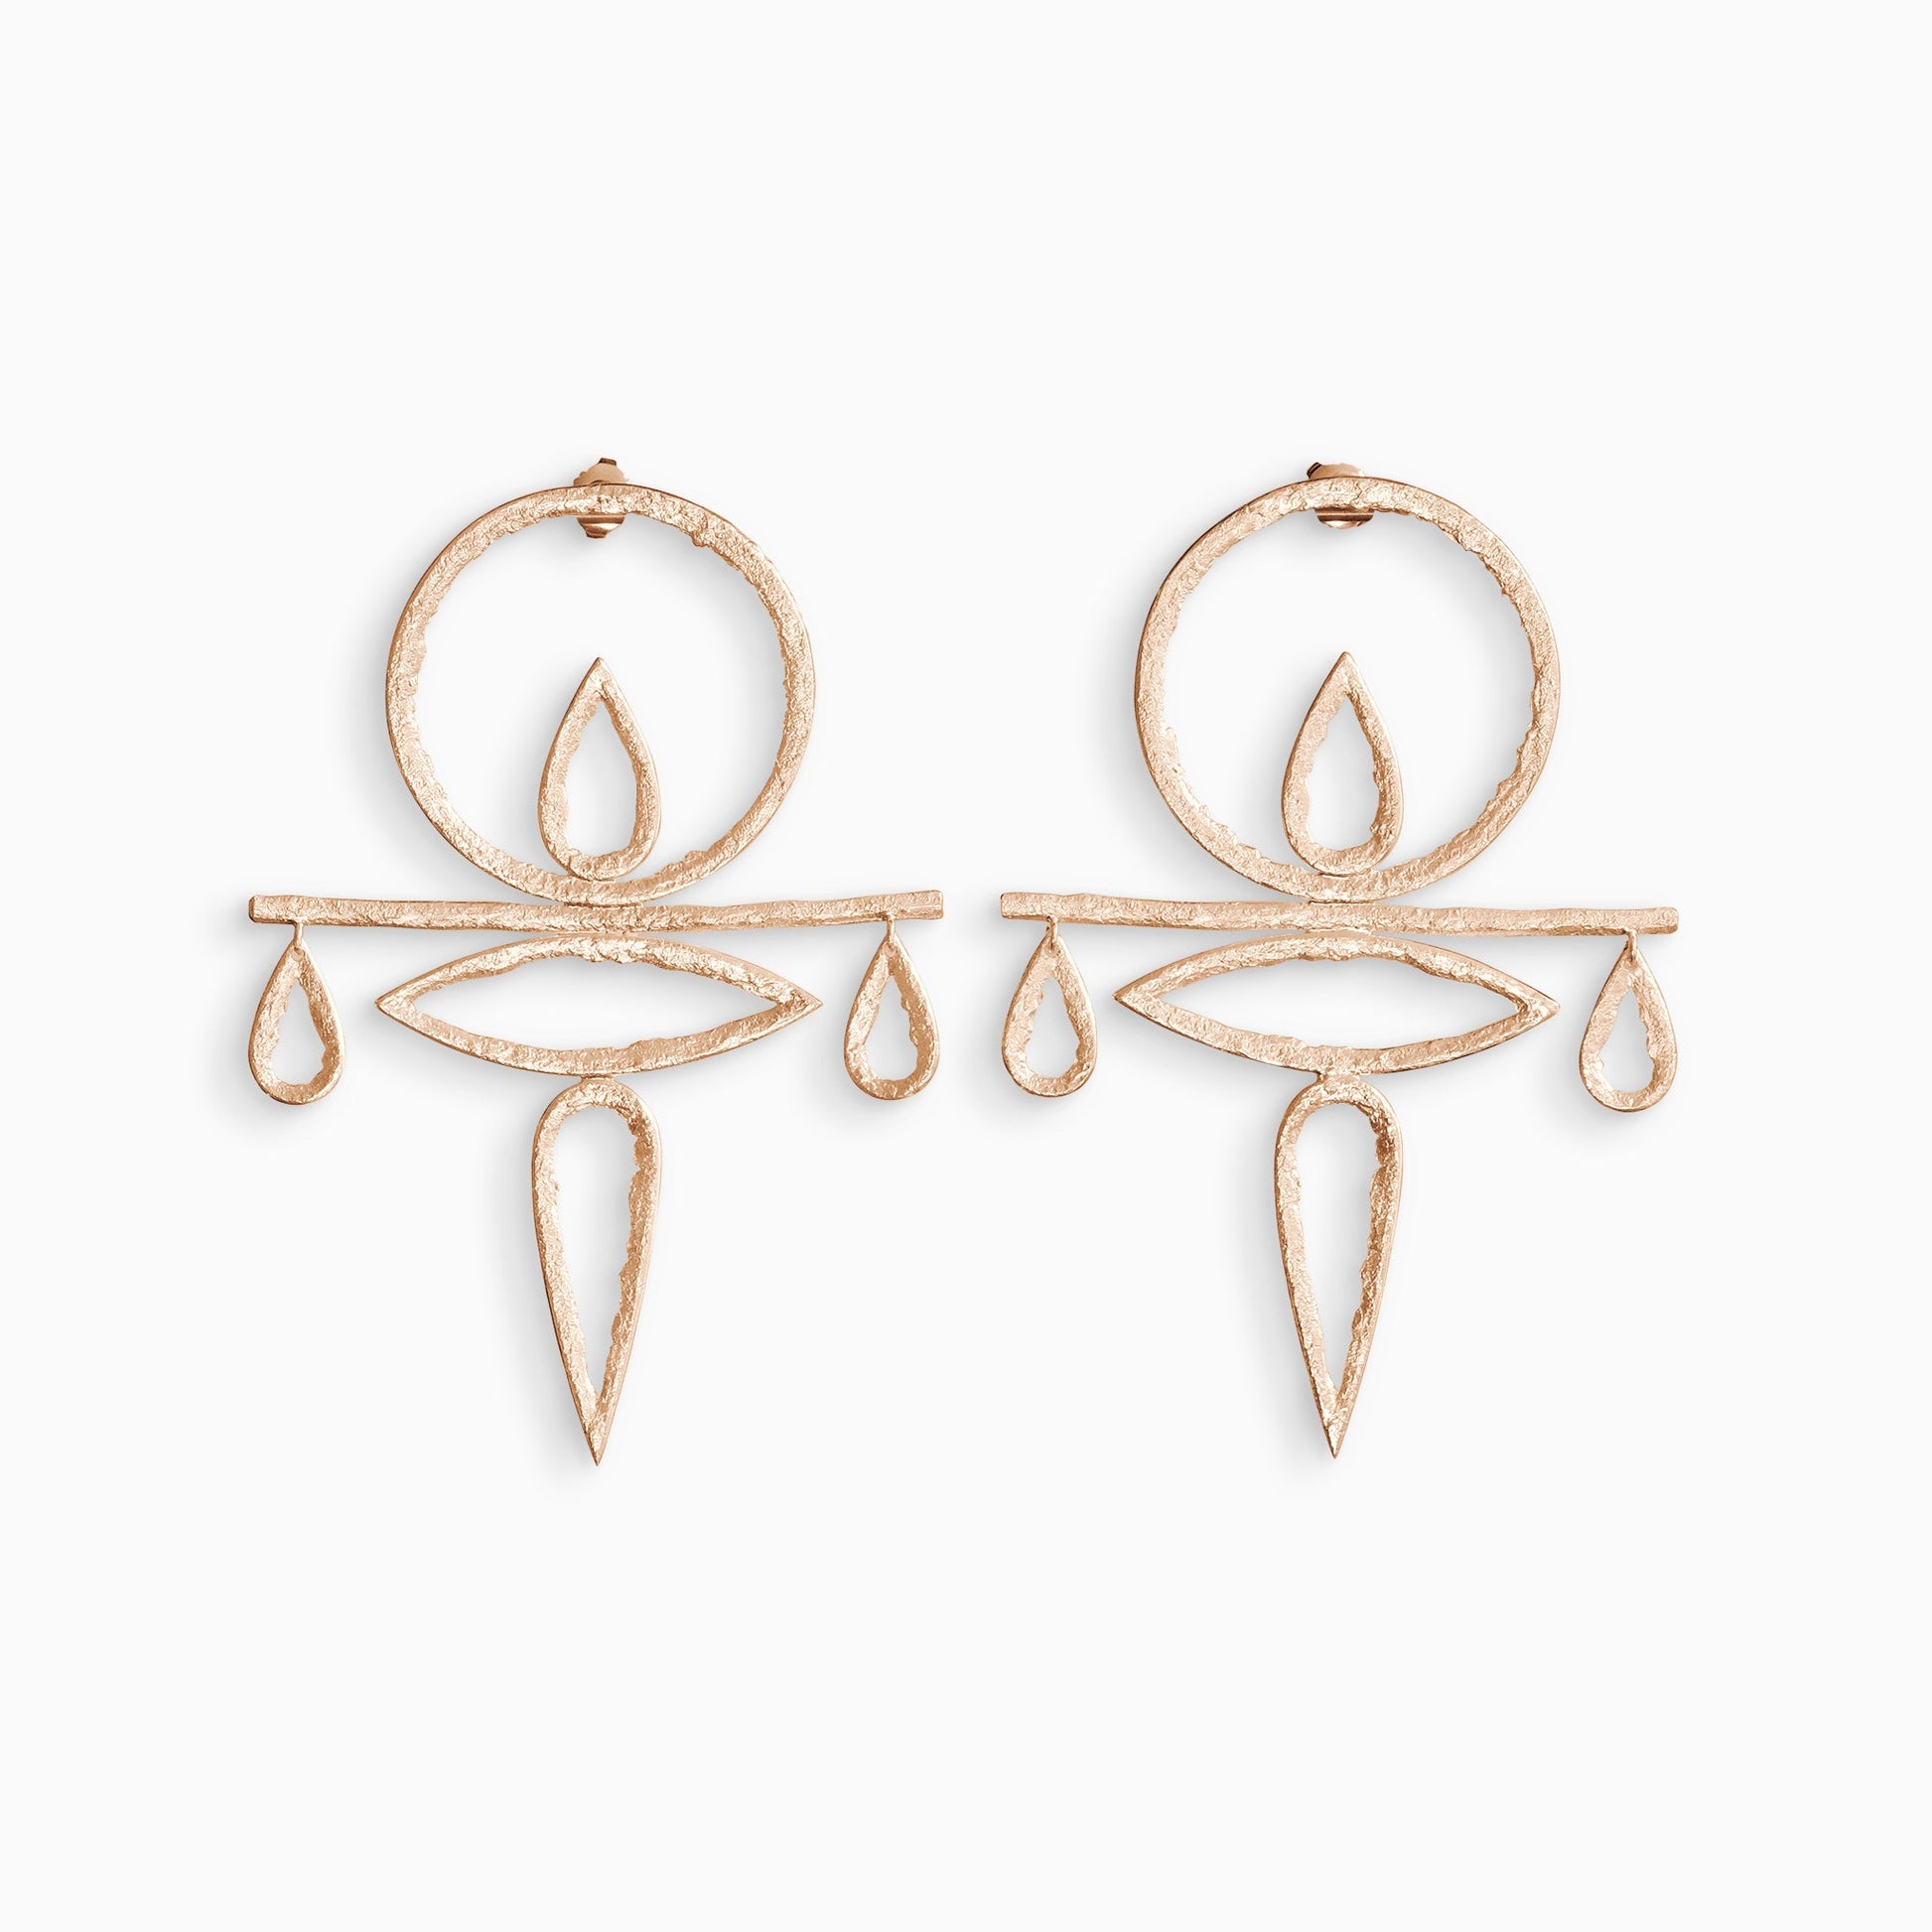 A large pair of 18ct Fairtrade rose gold drop stud earrings with a stud ear fitting. A large circle shape with a smaller teardrop shape inside connects to a fine horizontal bar. Below this is a large lozenge shape and a large teardrop shape. Hanging from the ends of the bar are small teardrop shapes. These open strongly textured shapes have smooth outside edges and fragmented inside edges. 85mm x 60mm.